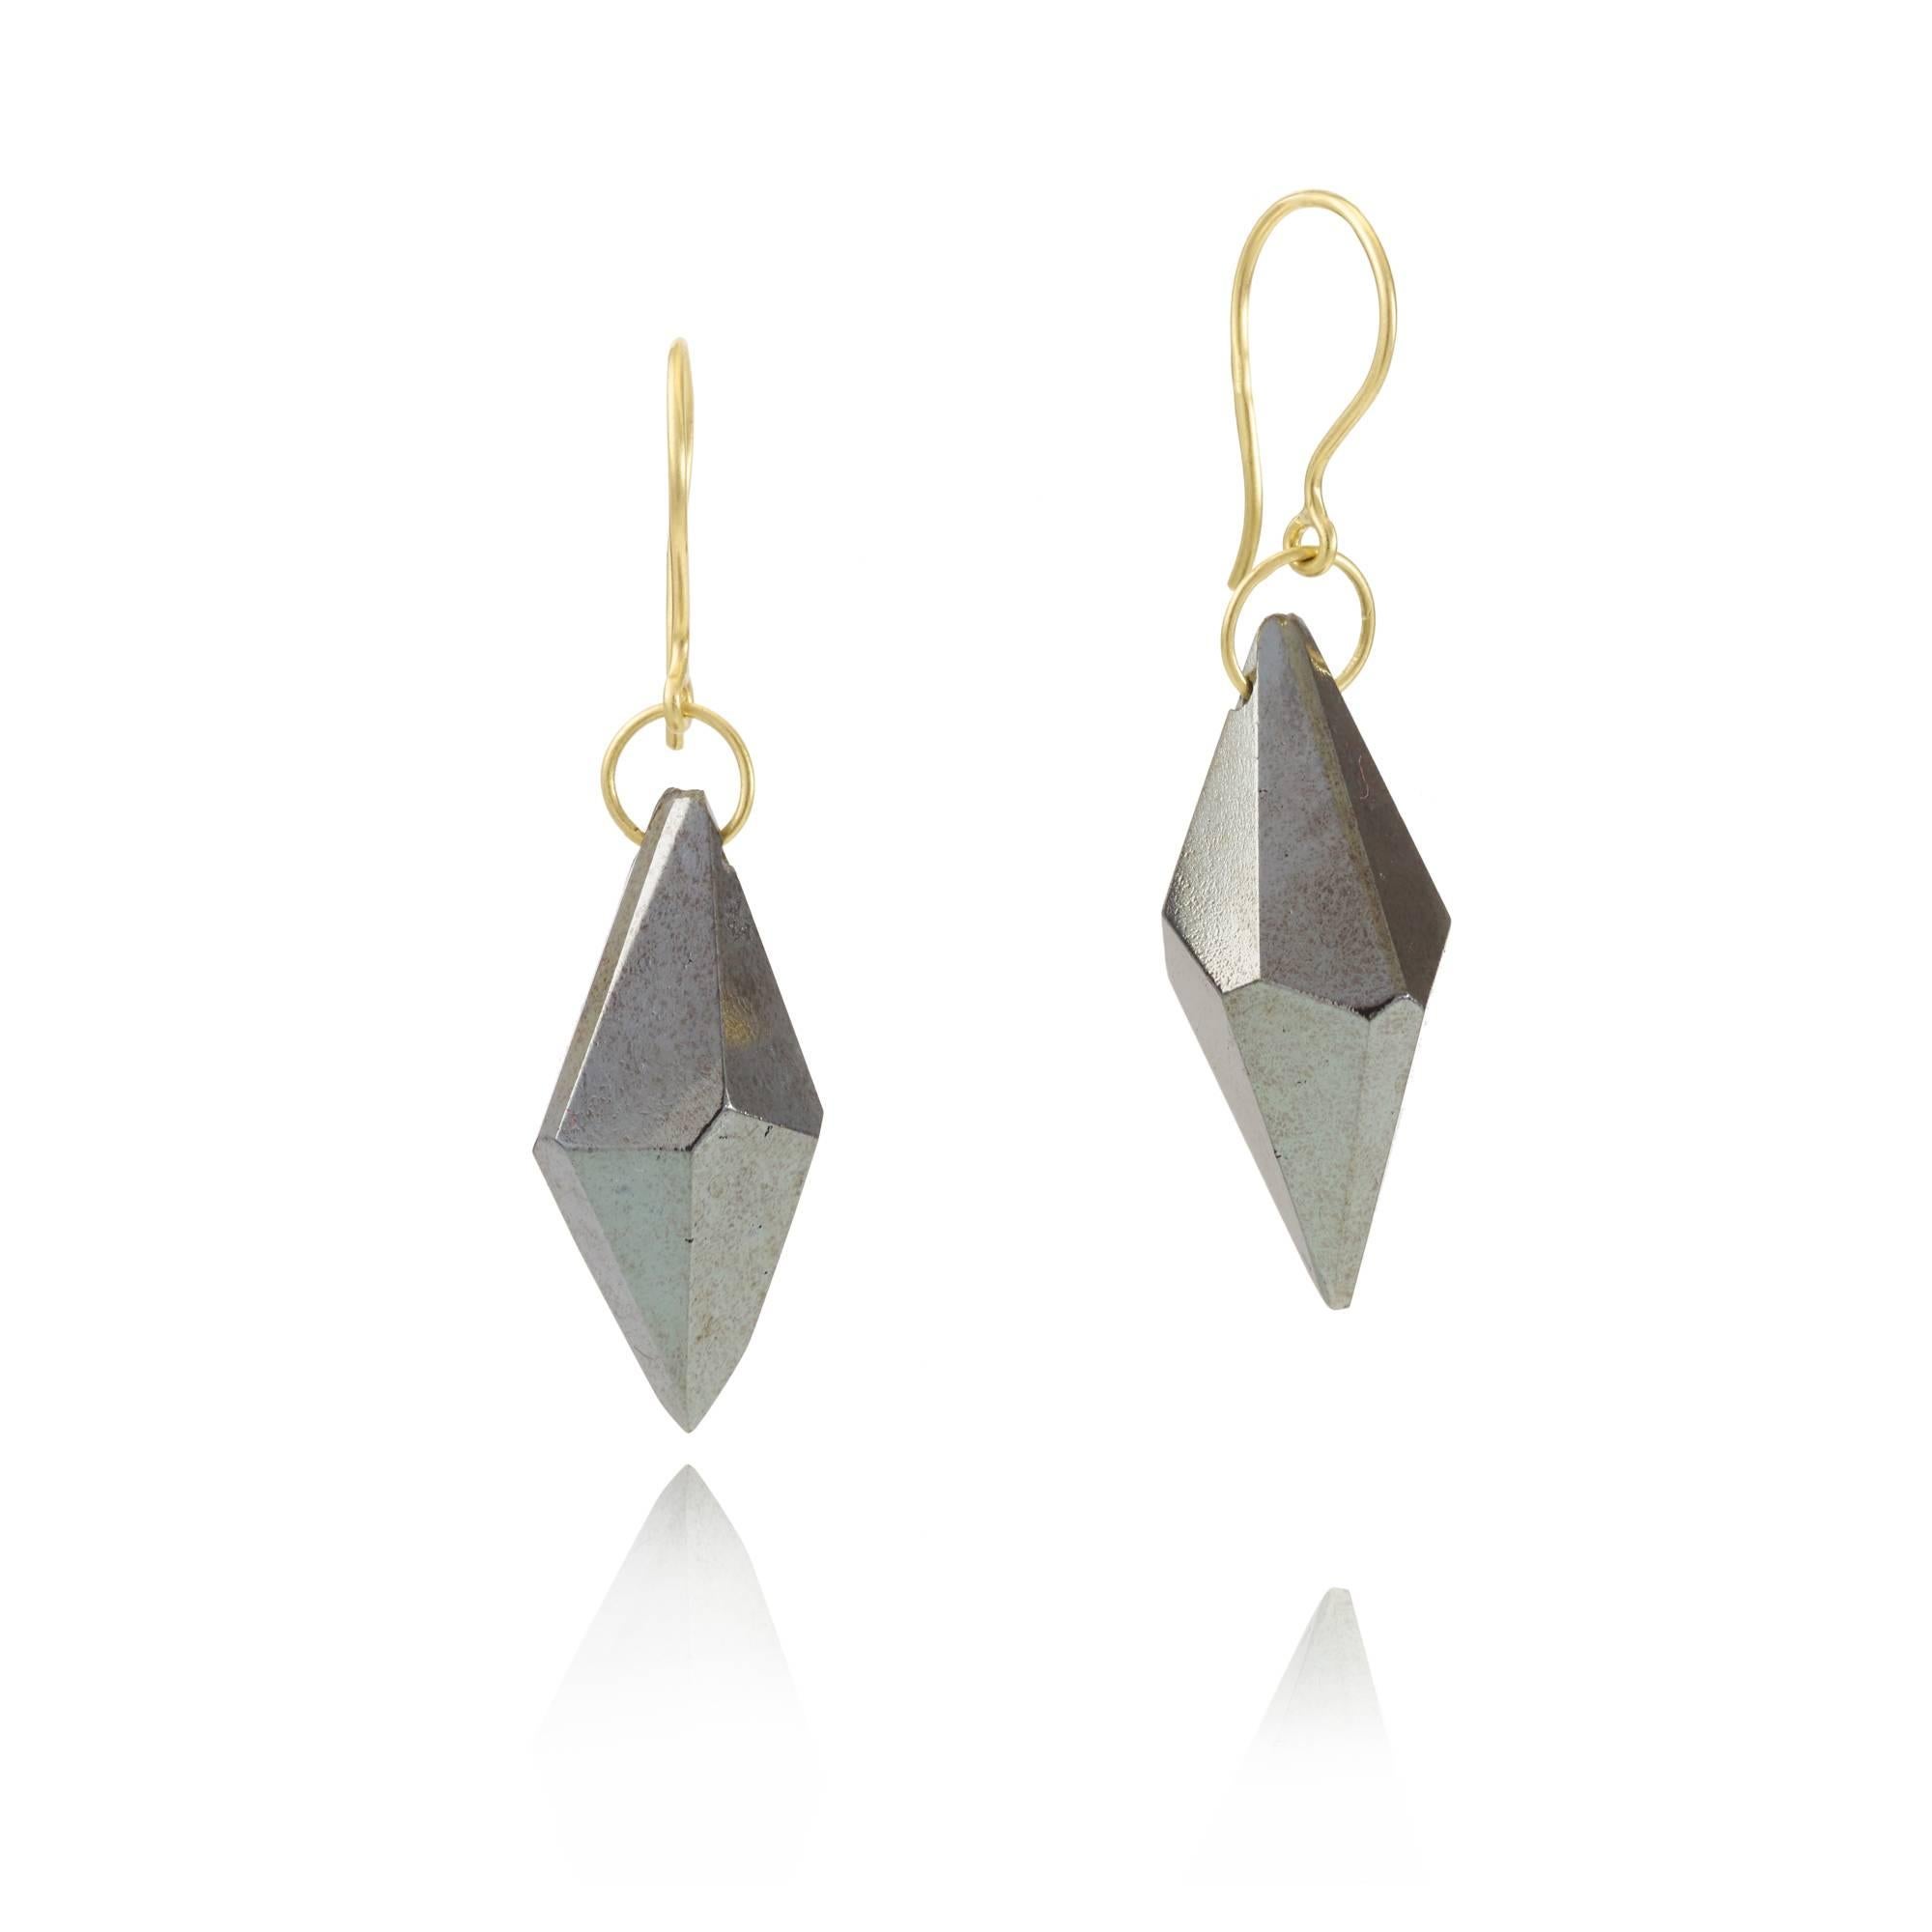 Handcrafted in India, our simple set faceted single drop earrings allow the stones to take centre stage.